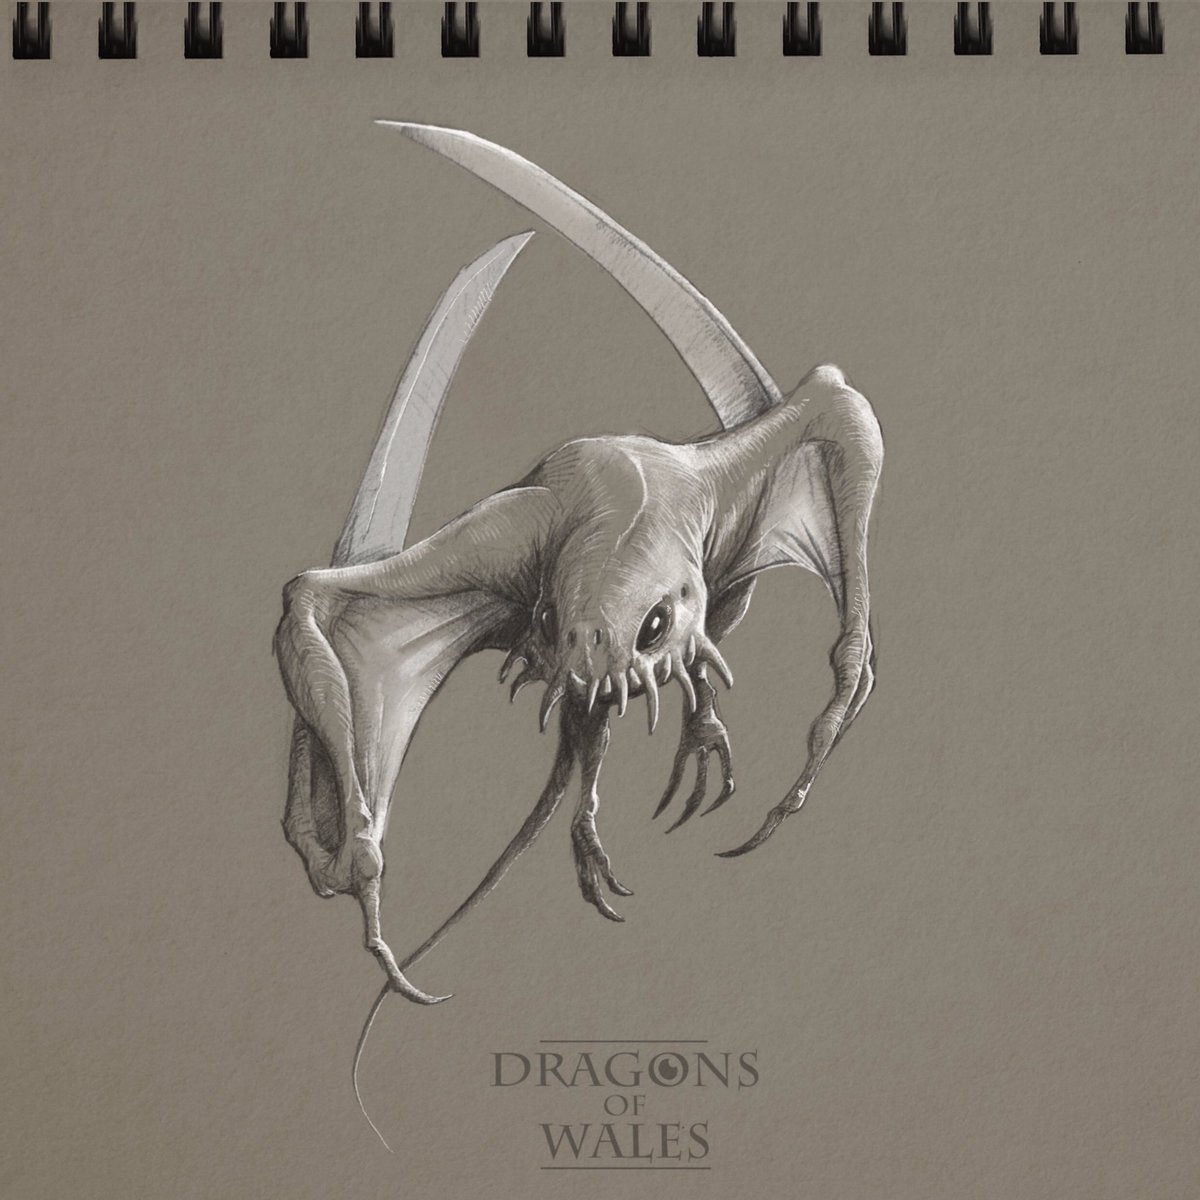 THREAD: 100 Days, 100 Dragons. Well, this it. The 100th and last of my  #DailyDragon sketches, all done during  #lockdown in Wales . This seems like a good time to bring them all together in one (long) thread. So here goes (1/25)